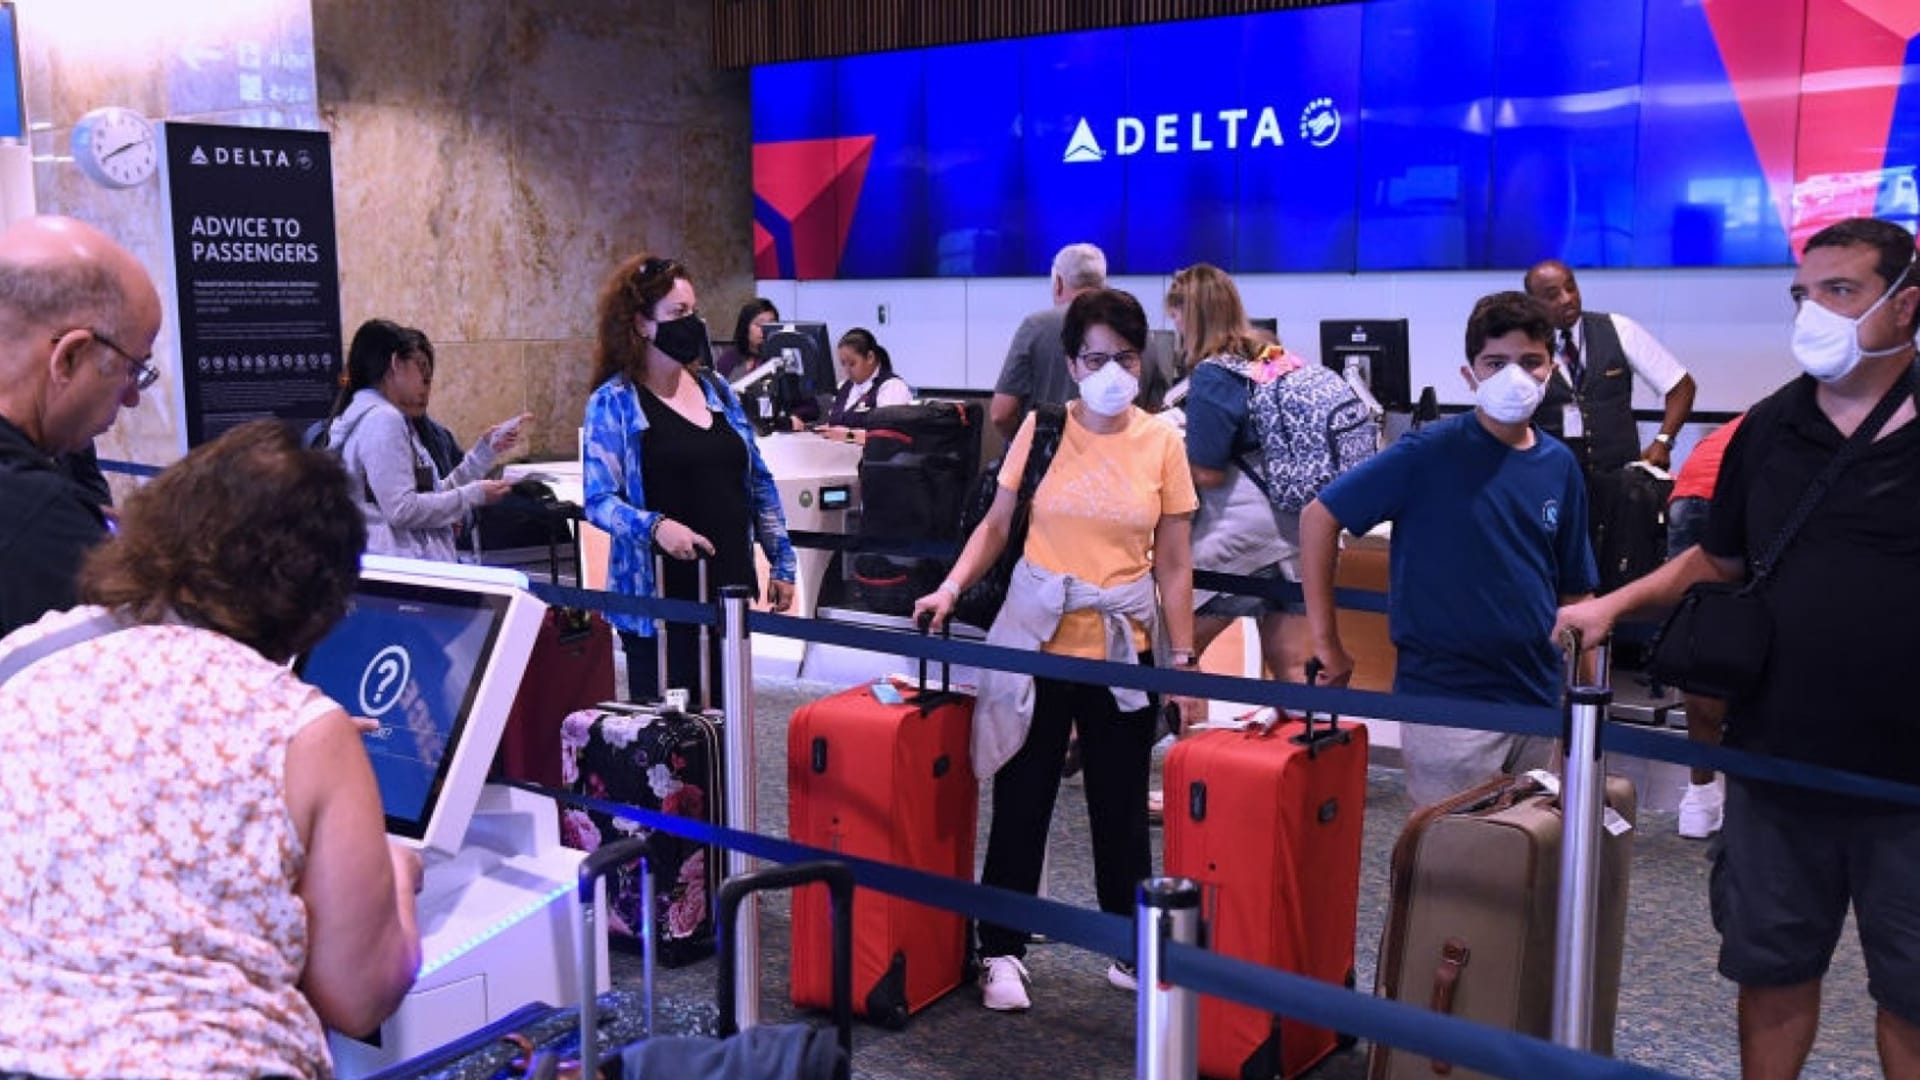 Amid Thousands of Canceled and Delayed Flights, Delta Quietly Solved the Worst Thing About Travel. It's the Best I've Seen Yet